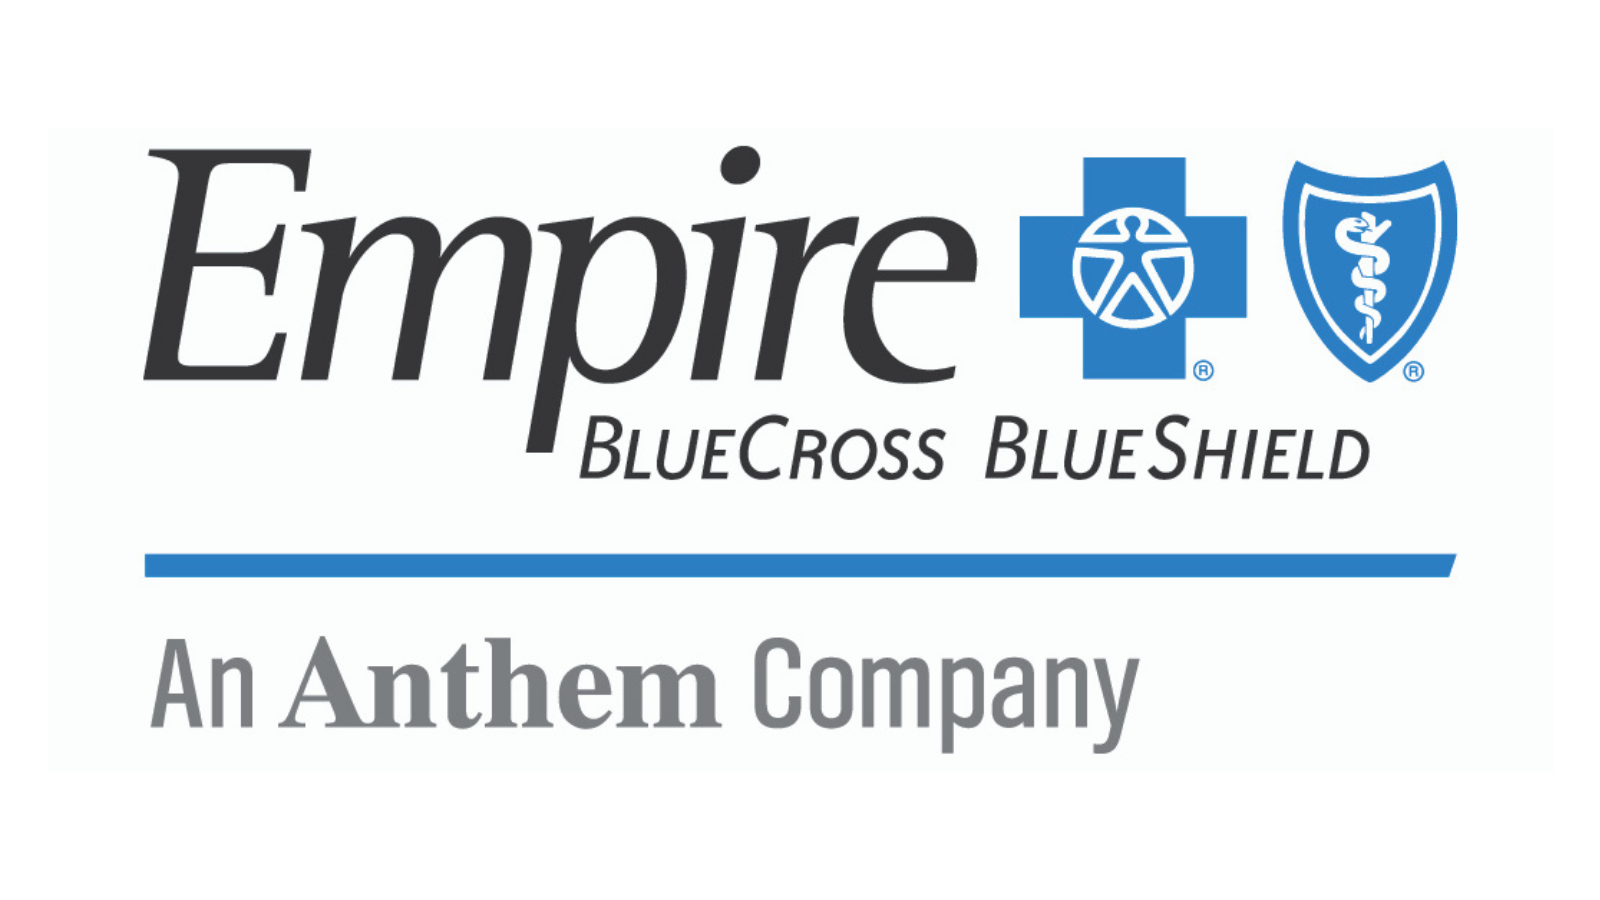 Staten Island PPS Receives Grant from Empire BlueCross BlueShield